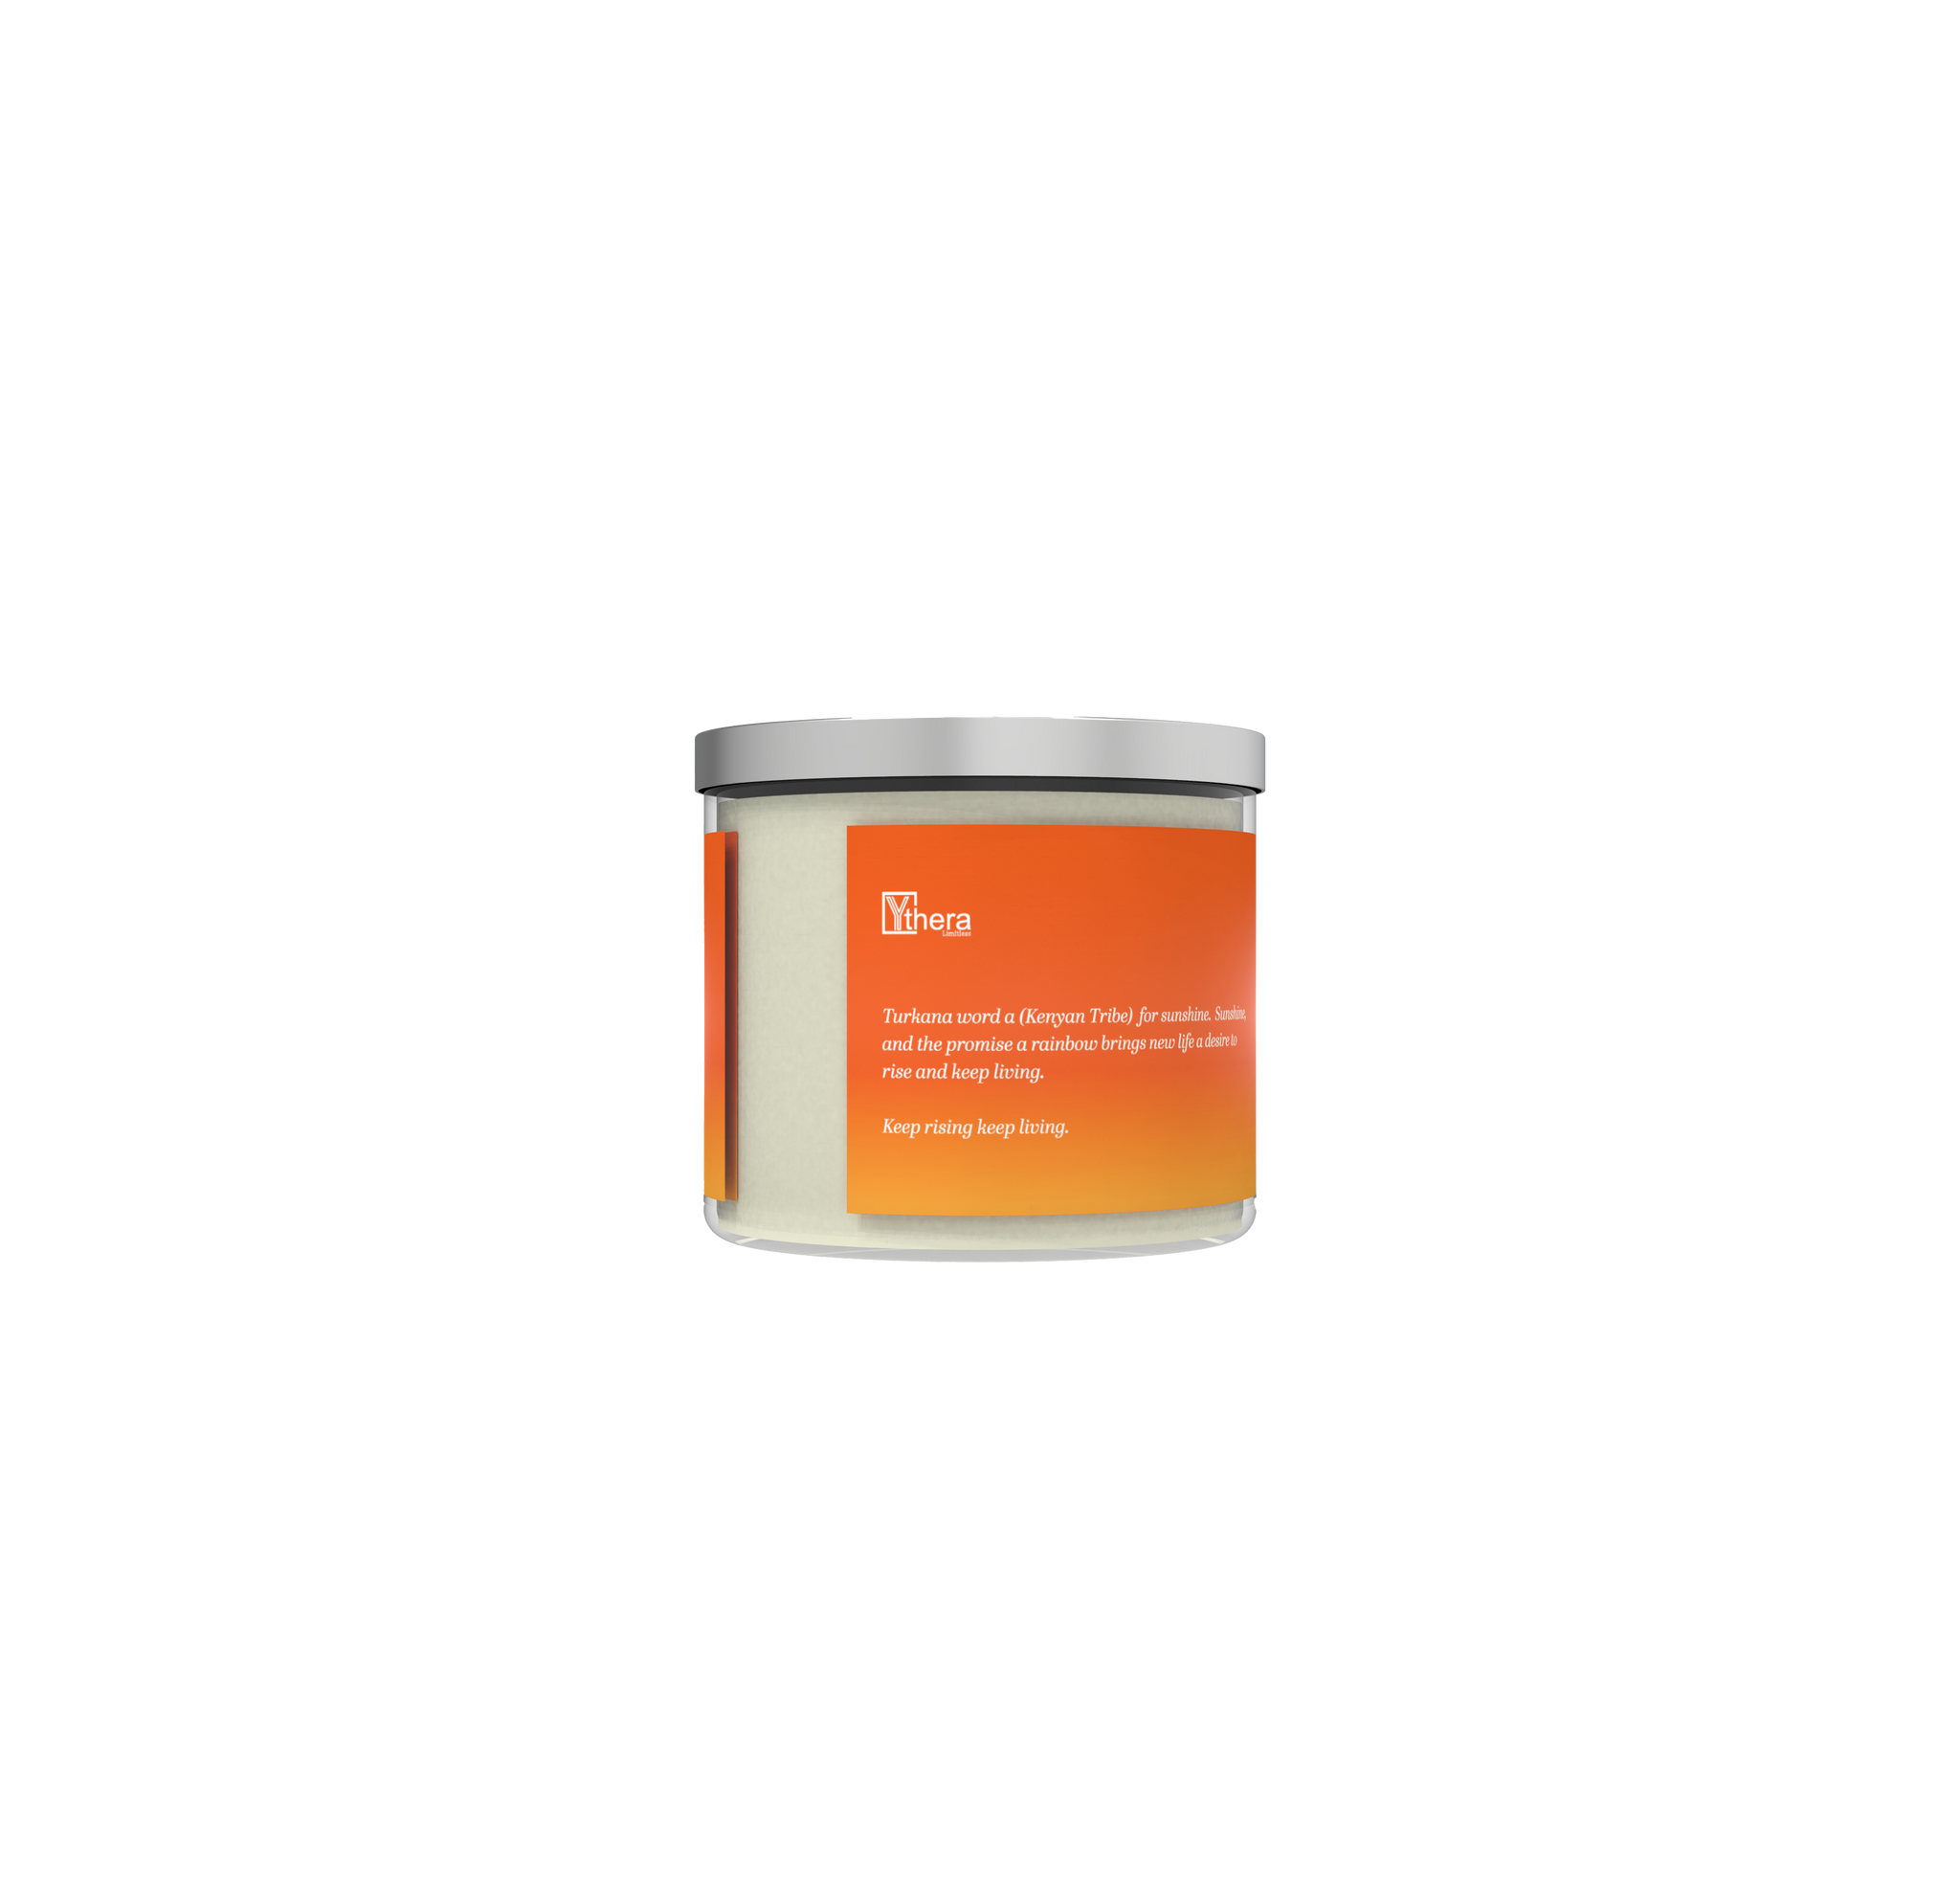 Okolong "Sun Kissed" 3-Wick Candle